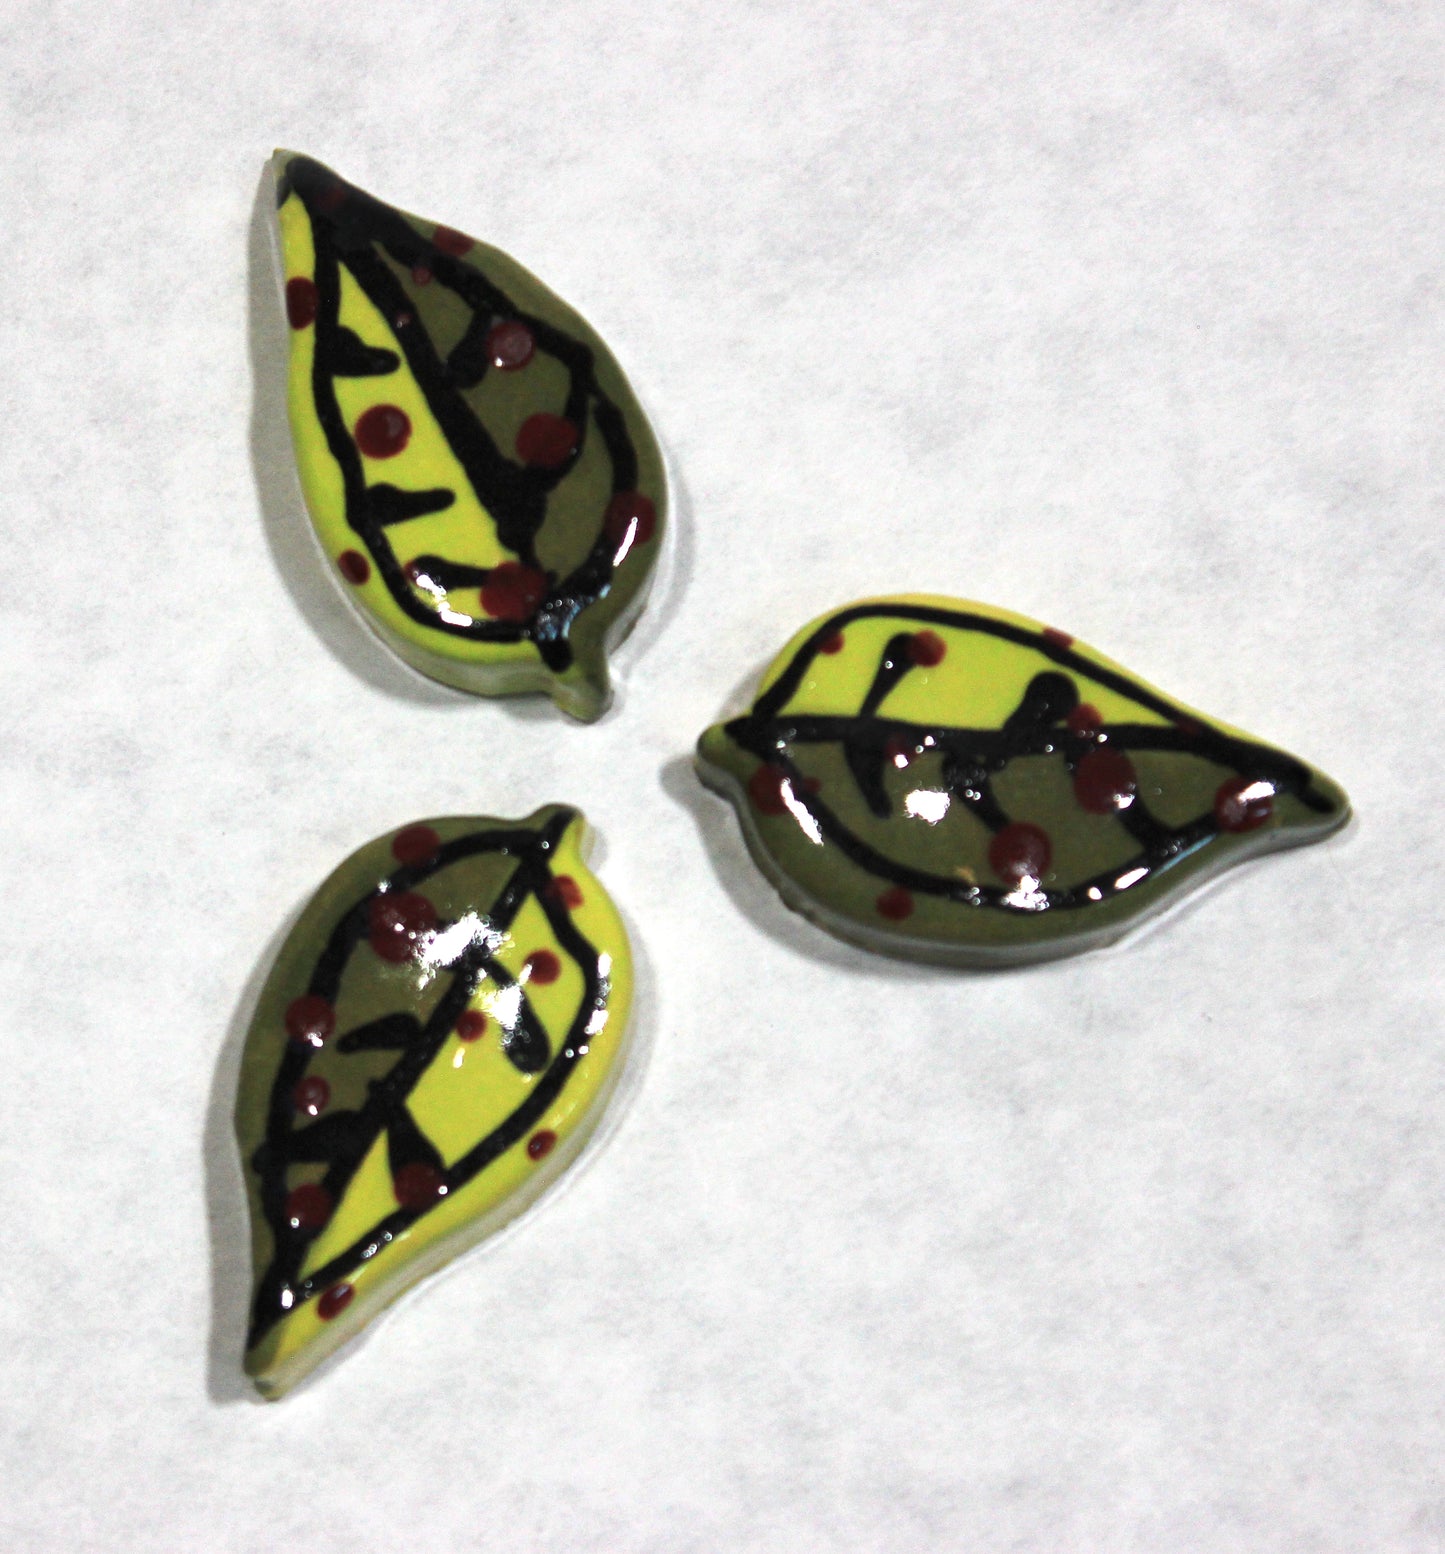 Small Whimsy Hand-Painted Green Leaf Tile Set